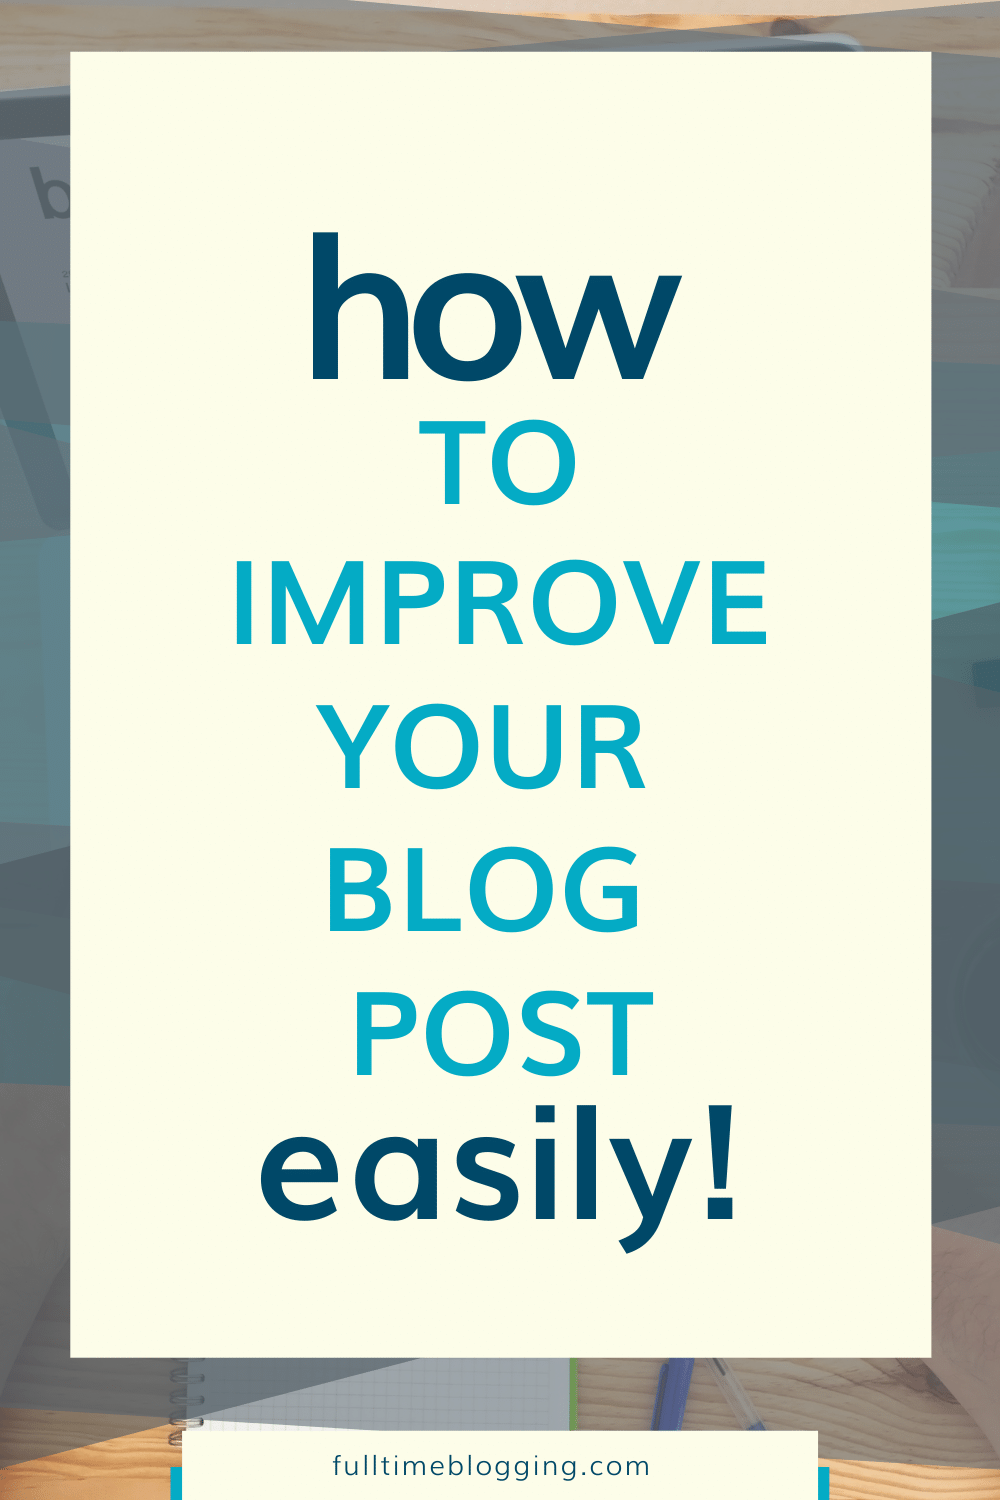 How To Improve Your Blog Post